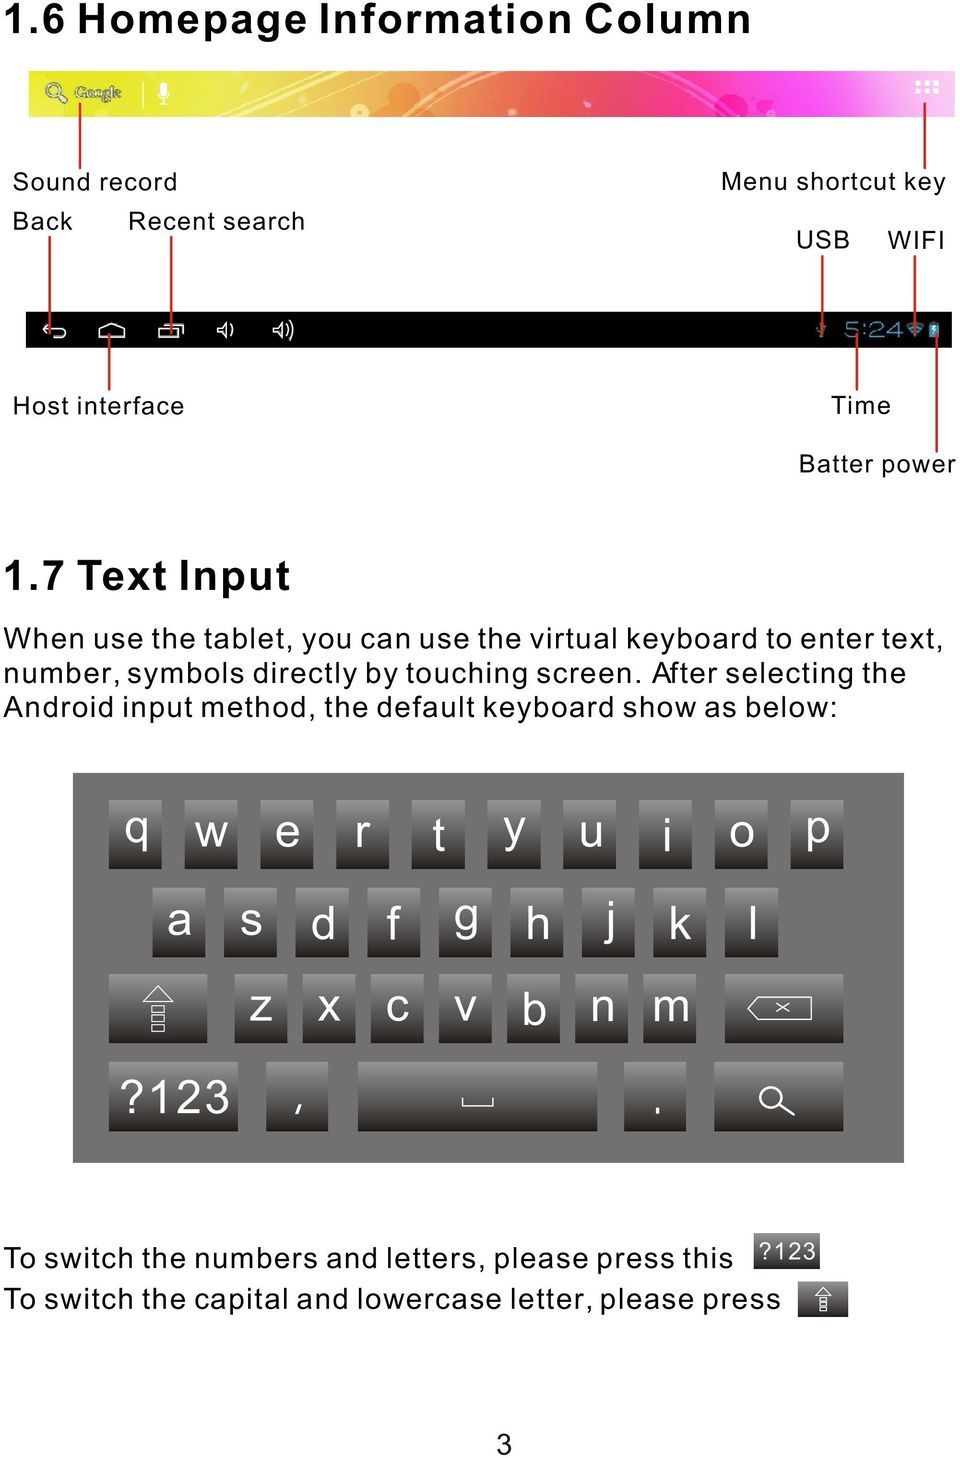 After selecting the Android input method, the default keyboard show as below: q w e r t a s d f g z x c v y u i o p h j k l b